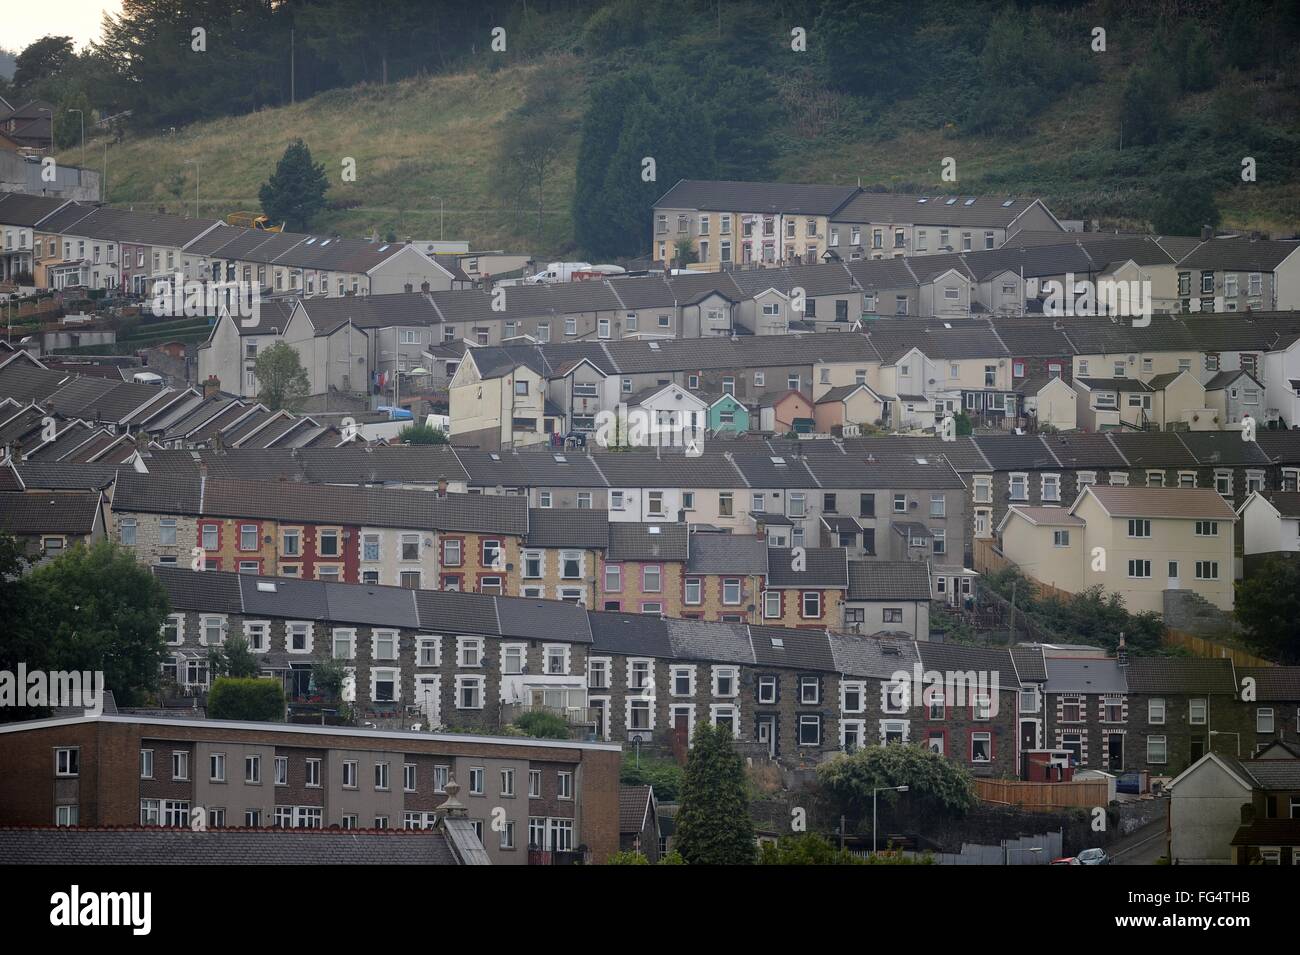 General view of Tonypandy in the Rhondda Valleys, South Wales. Stock Photo